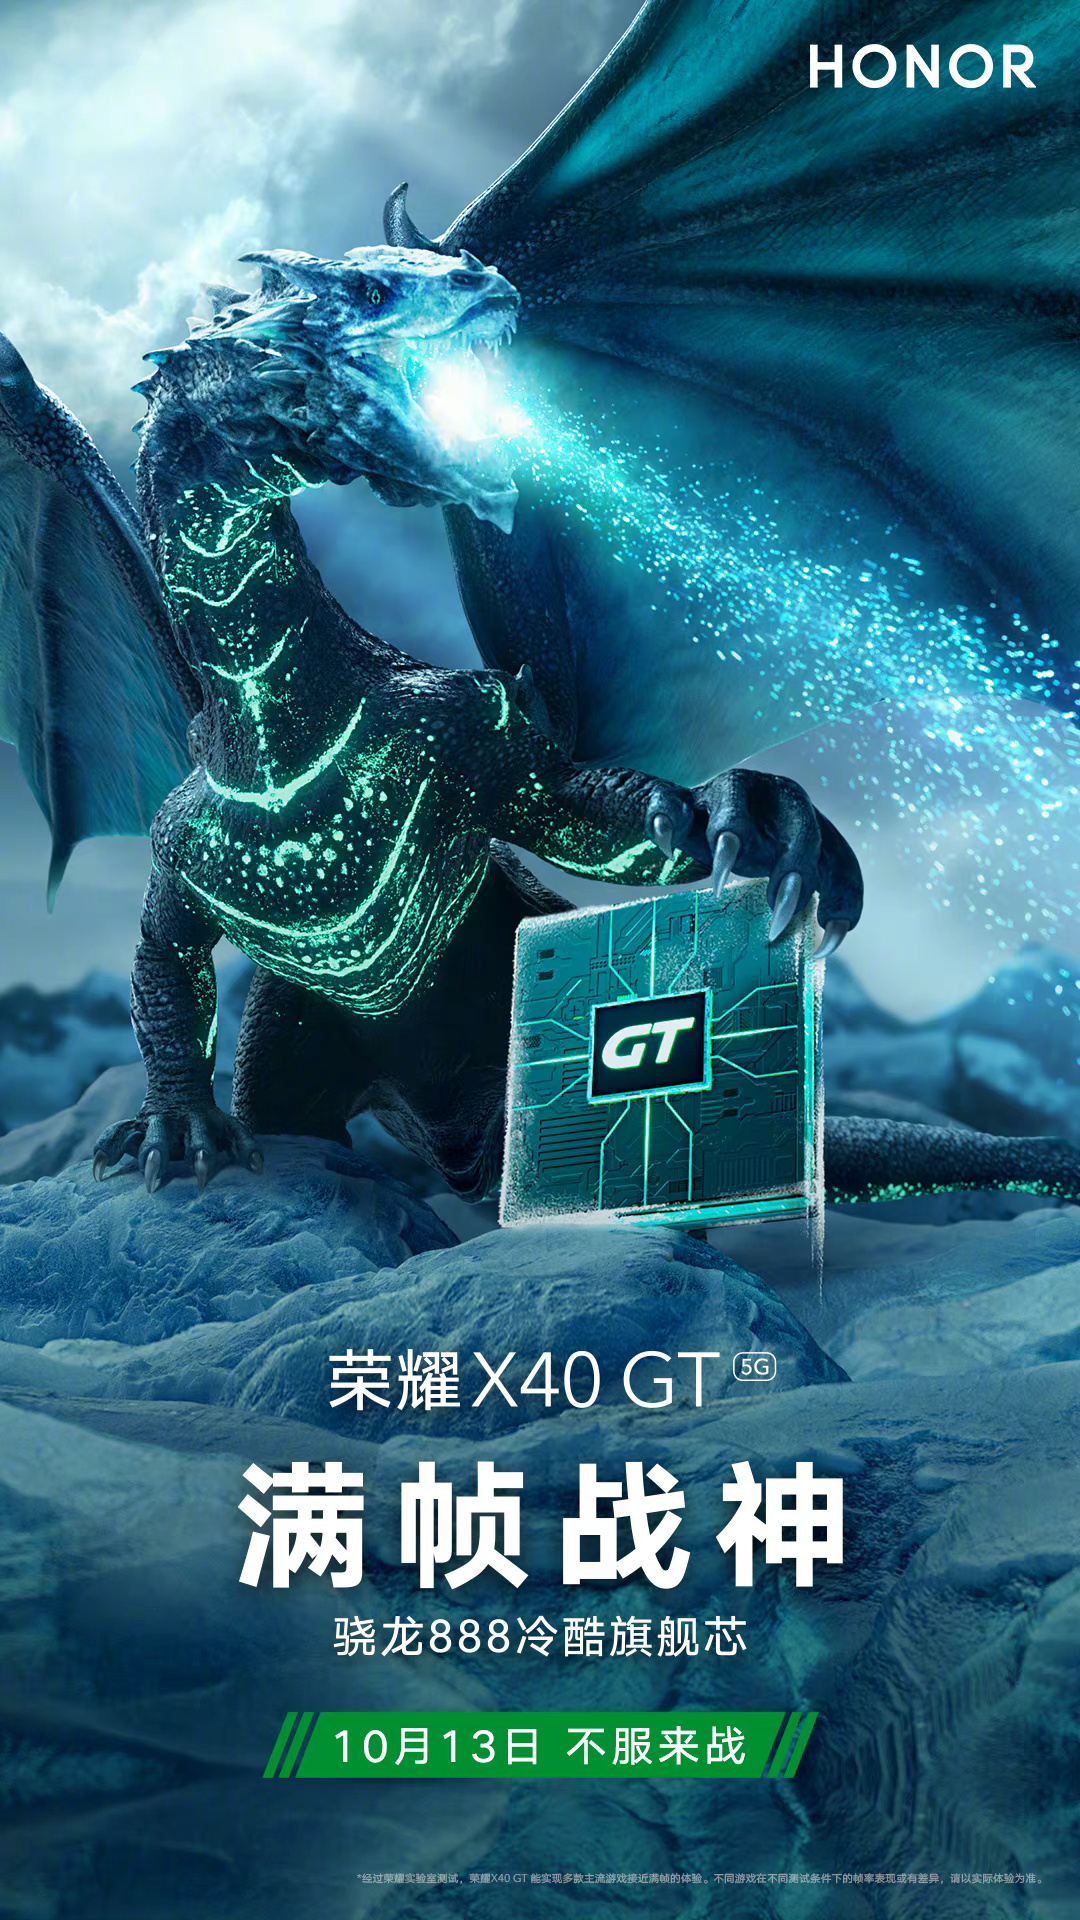 Honor X40 Official